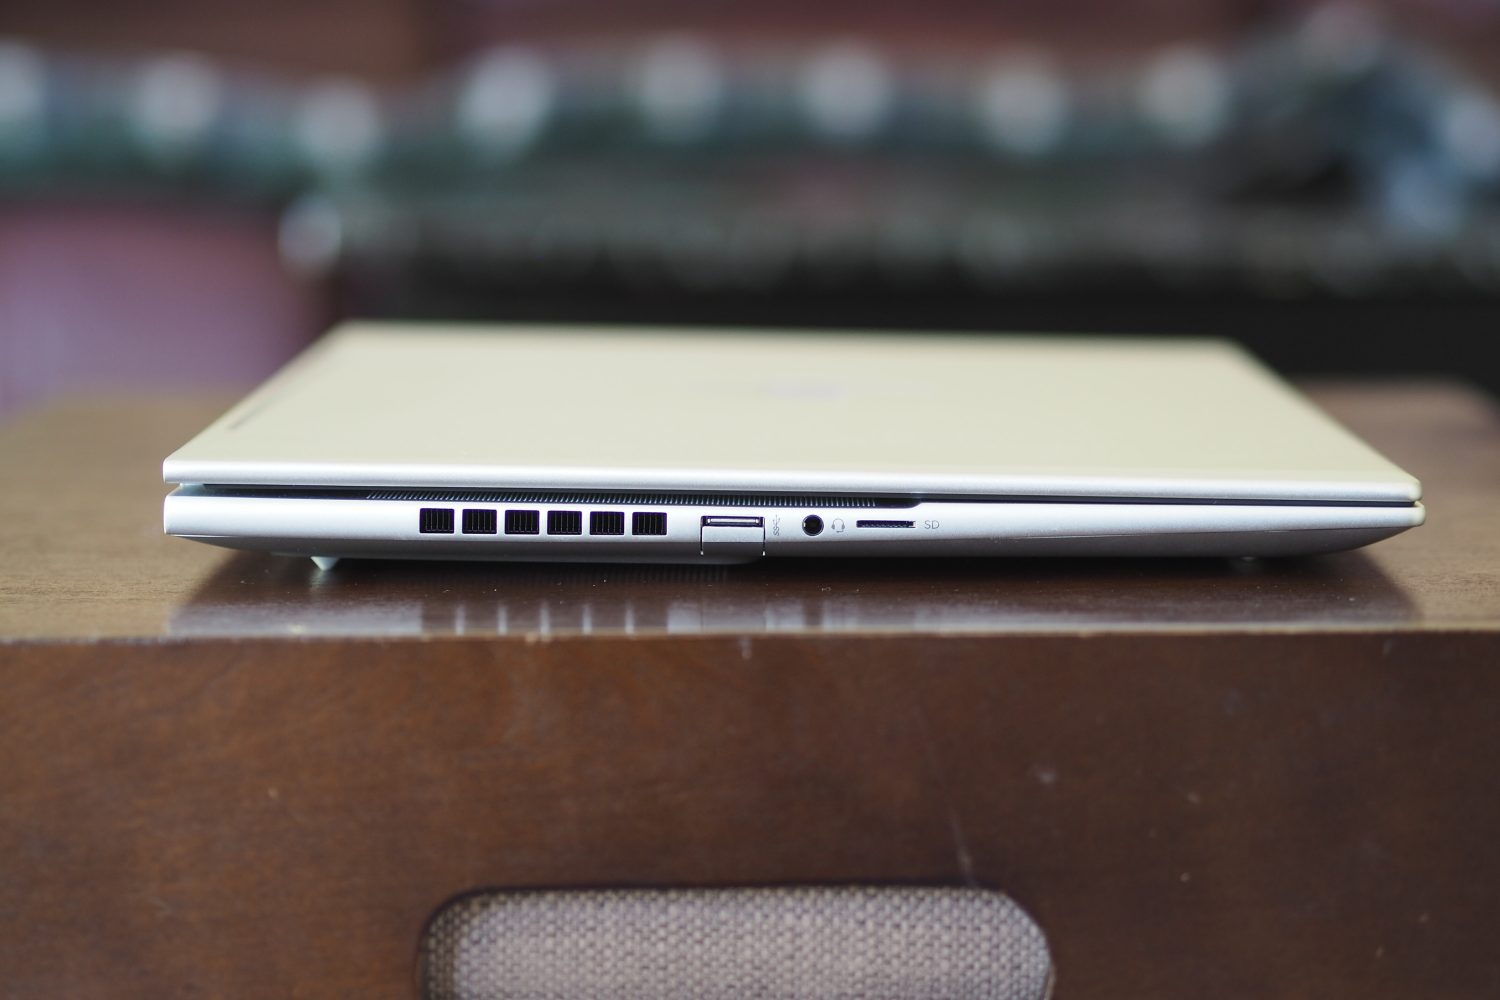 HP Envy 16 review: creative performance for less